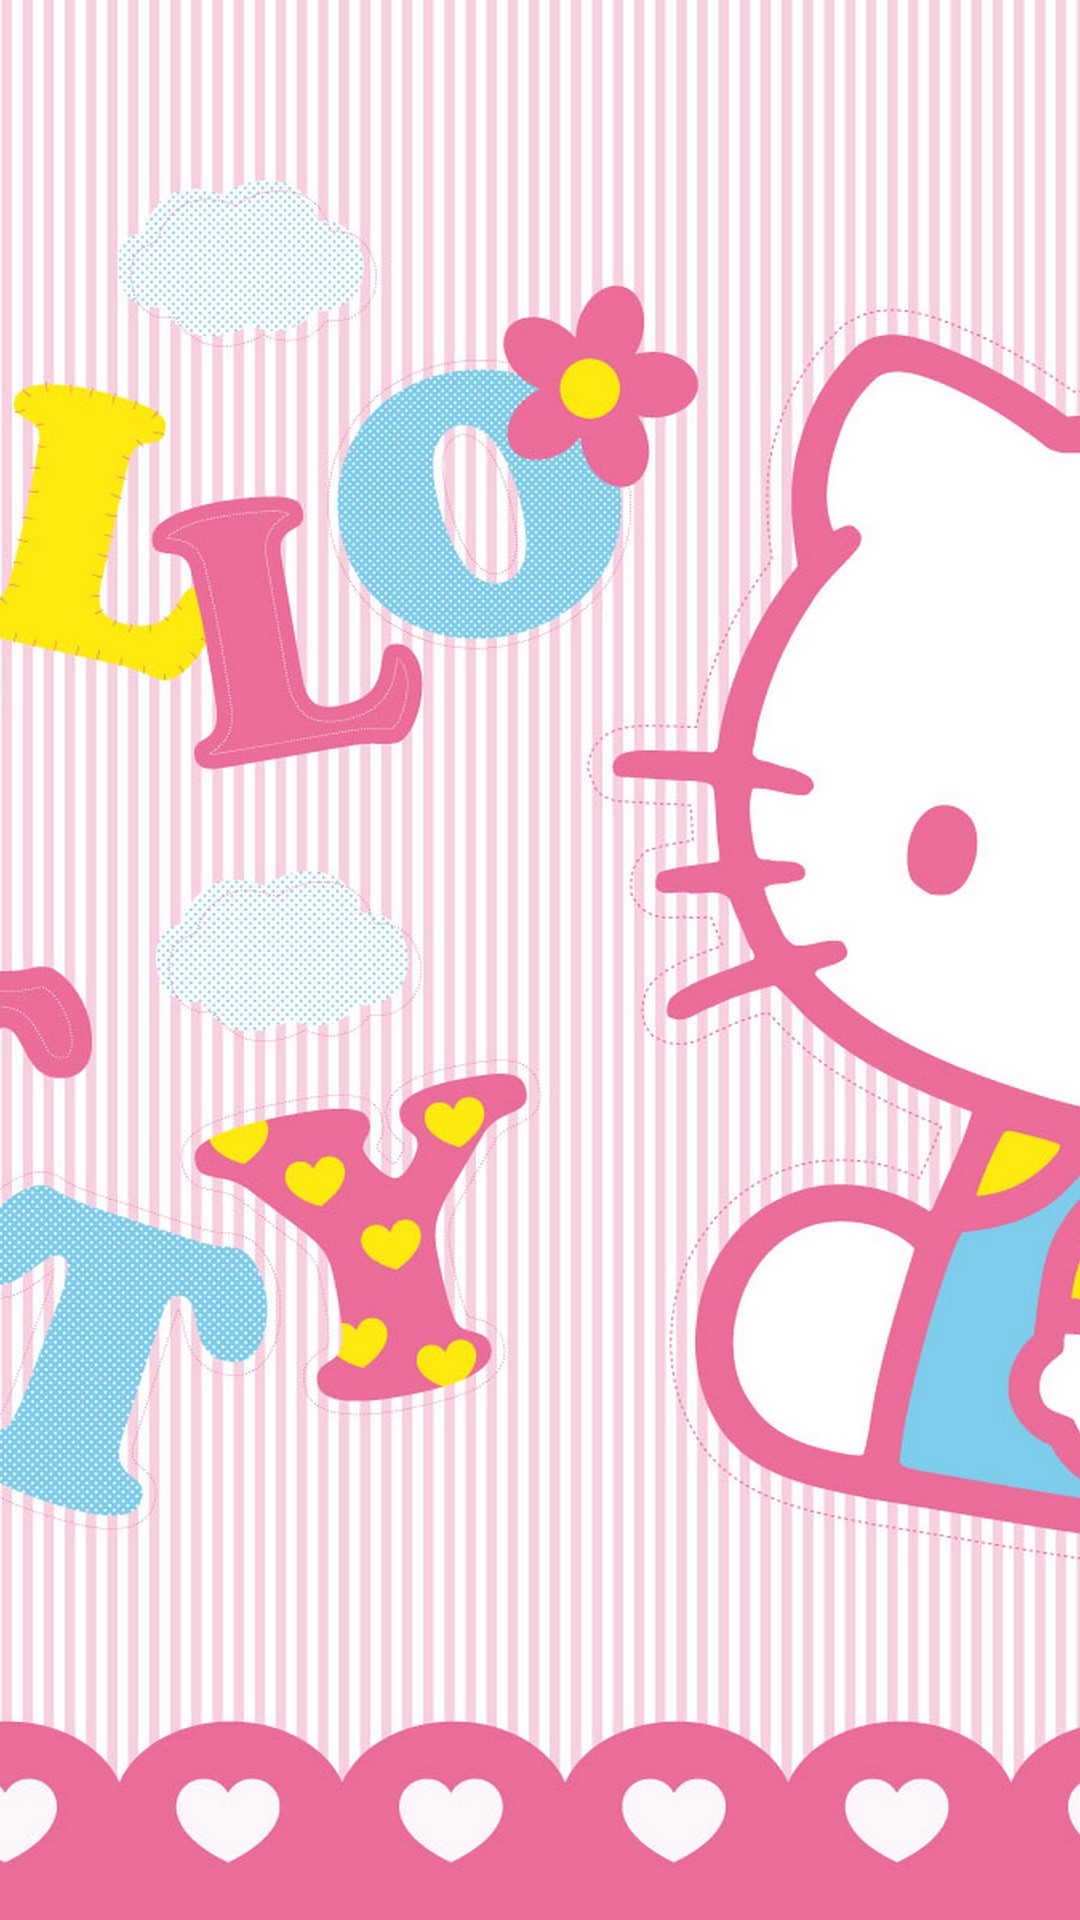 1080x1920 Sanrio Hello Kitty Wallpaper iPhone HD with image resolution   pixel. You can use this